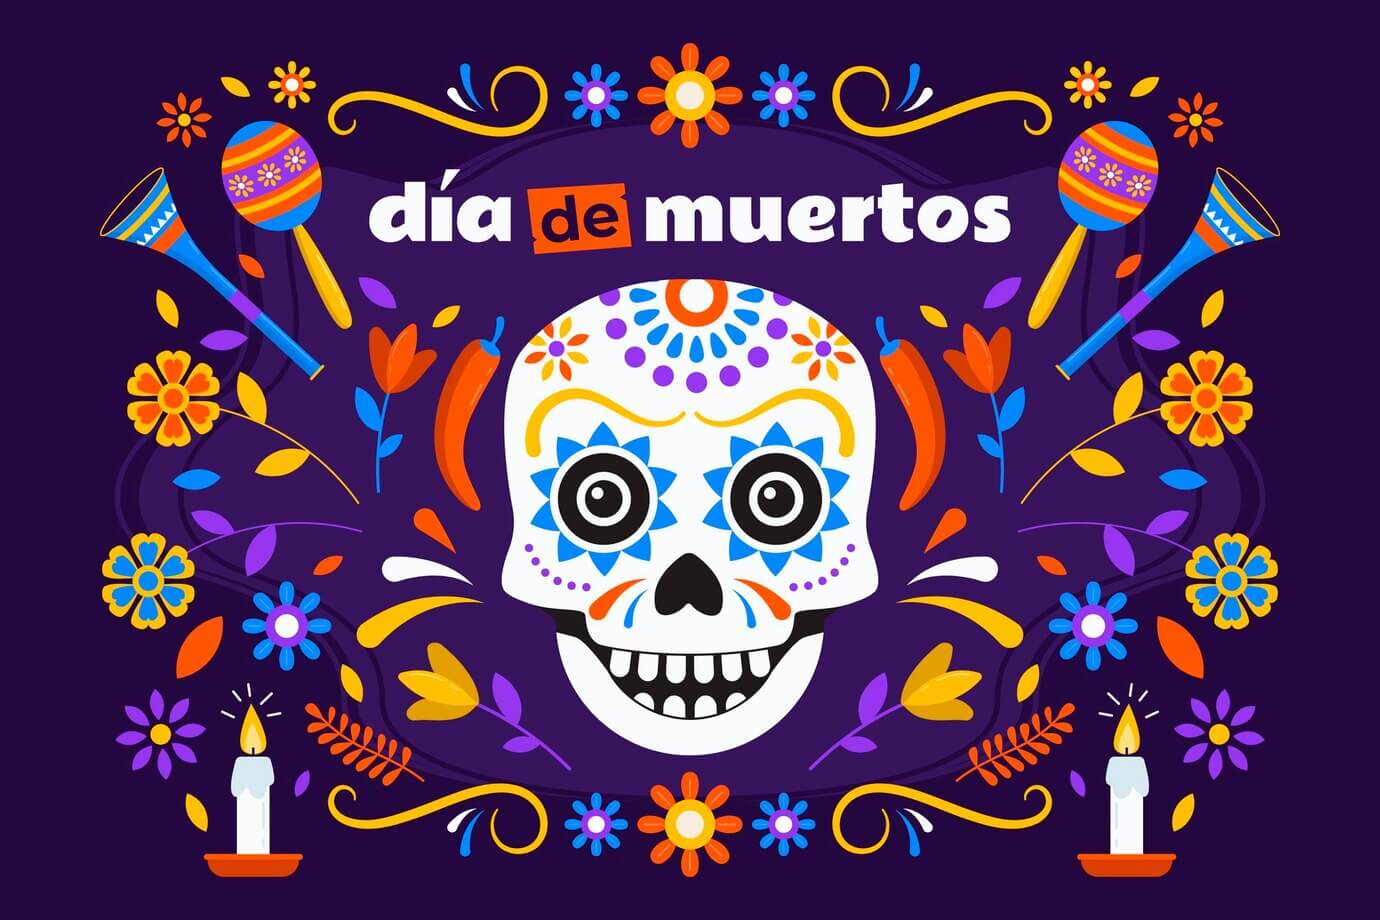 Day of the Dead Greetings